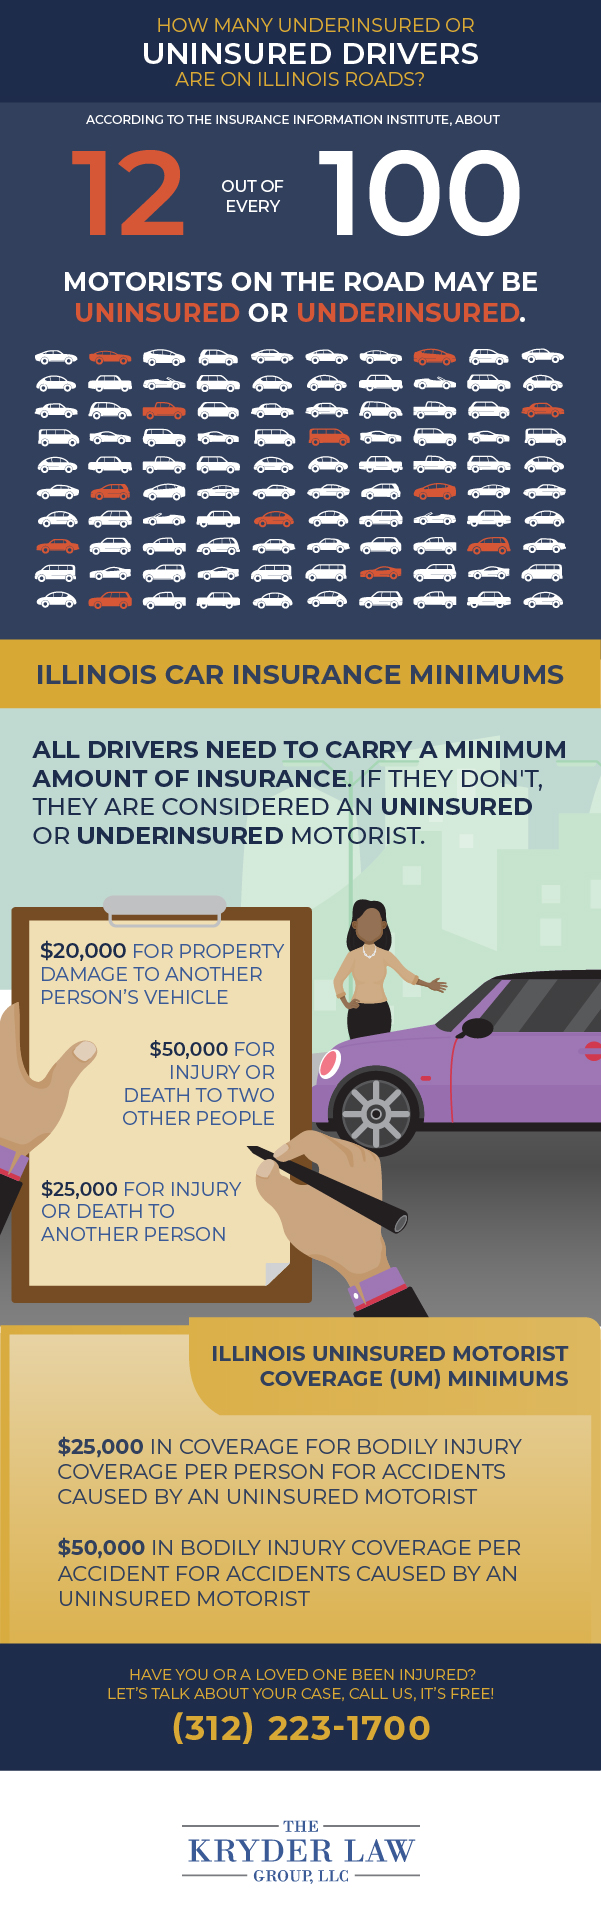 How Many Underinsured or Uninsured Drivers Are On Illinois Roads?